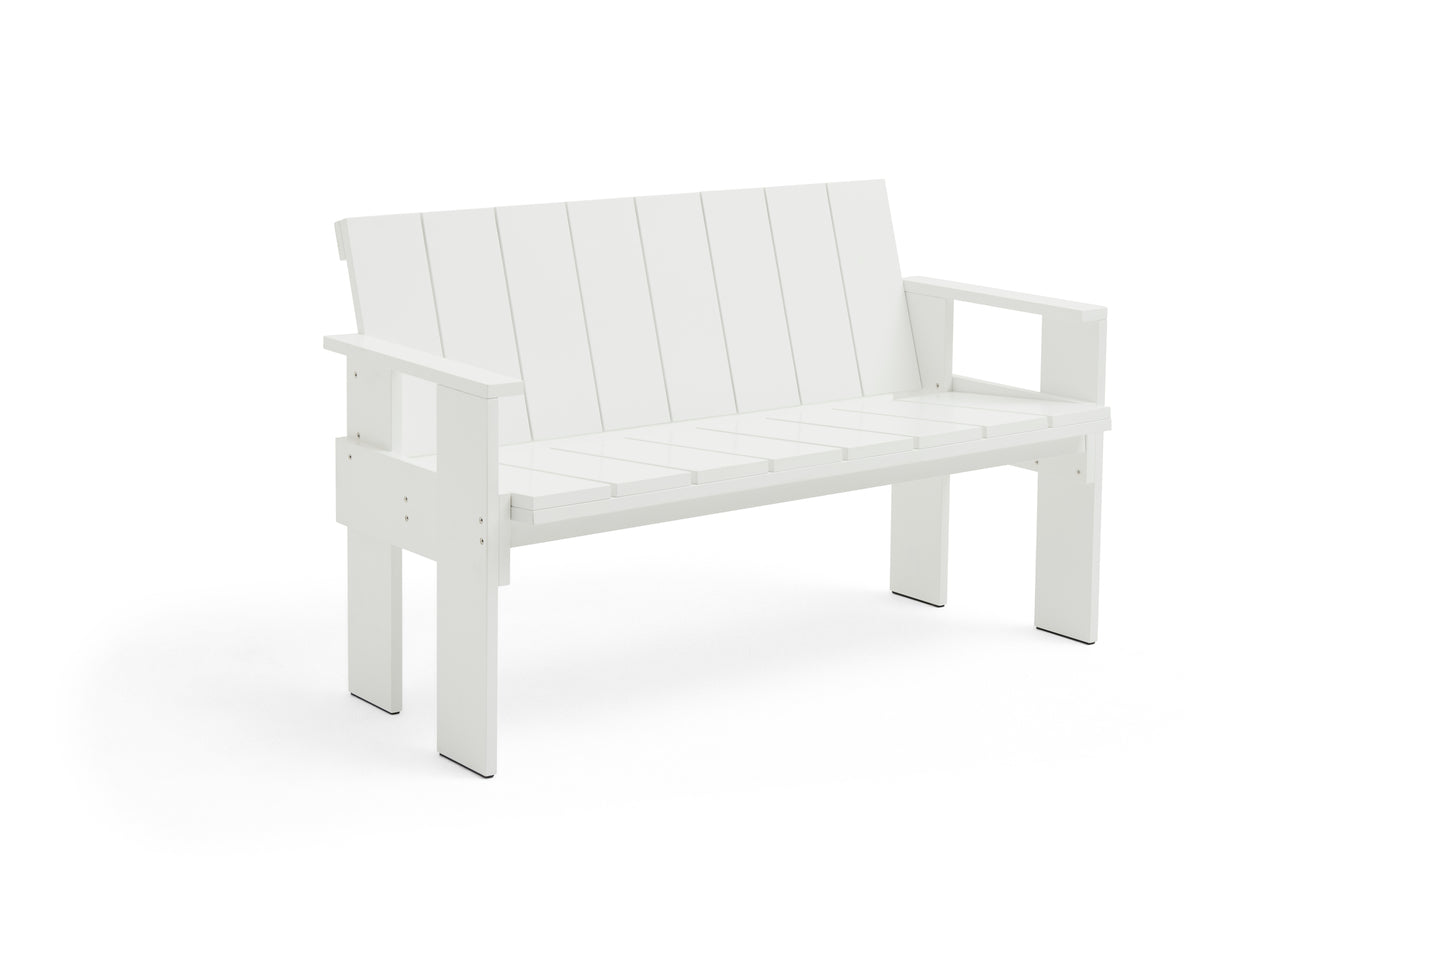 HAY Crate Dining Bench